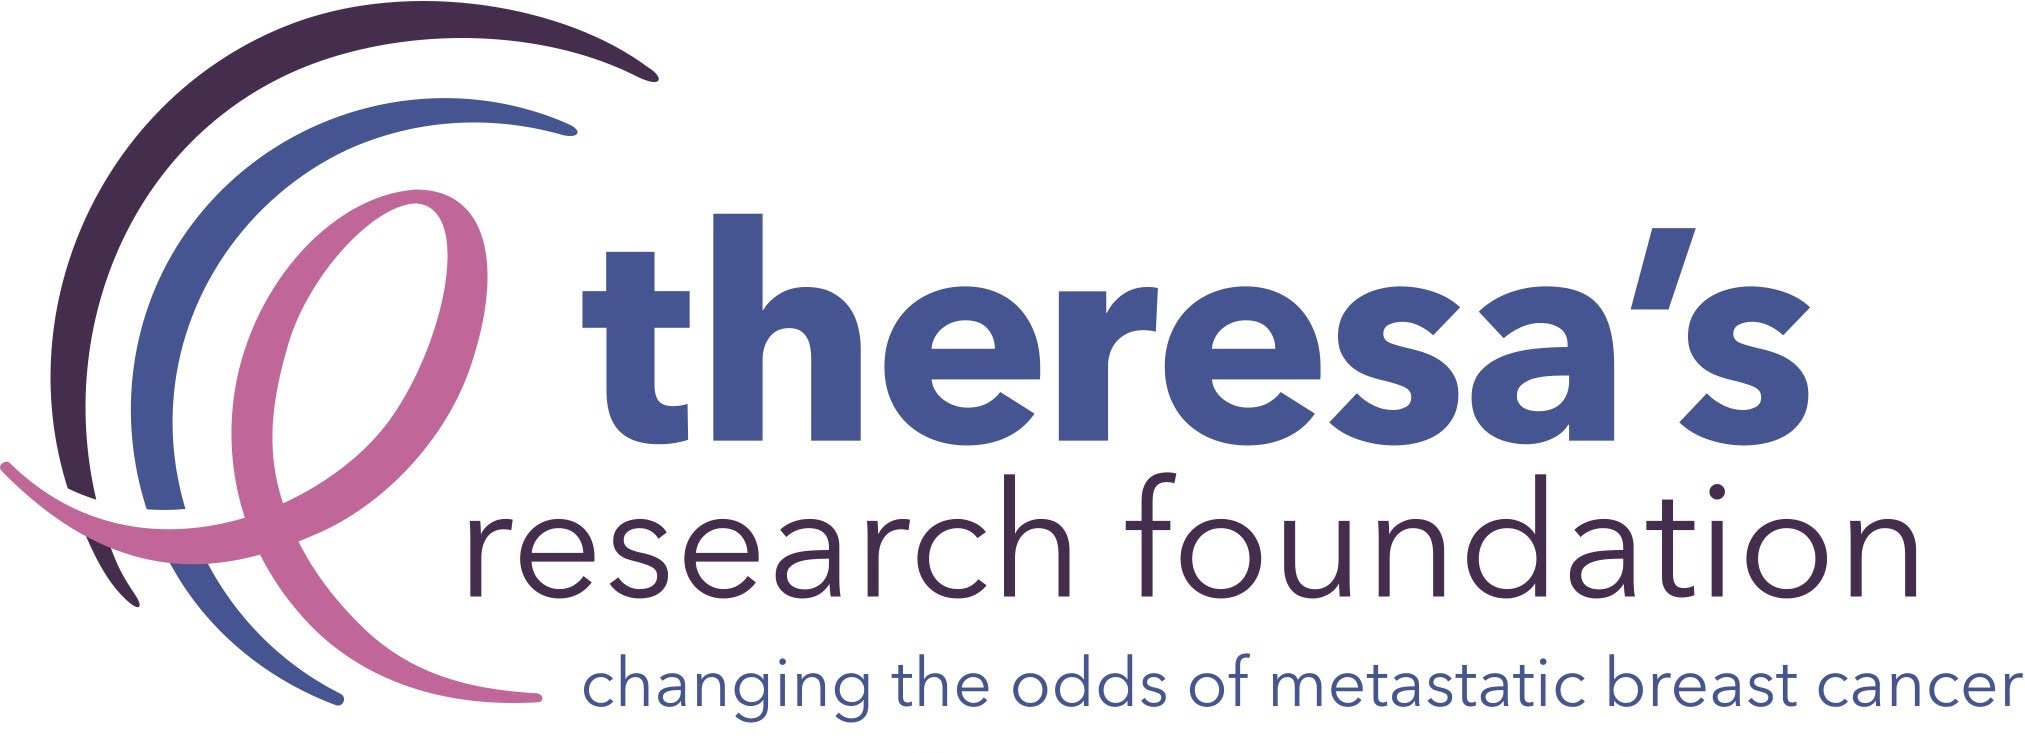 Theresa's Research Foundation logo